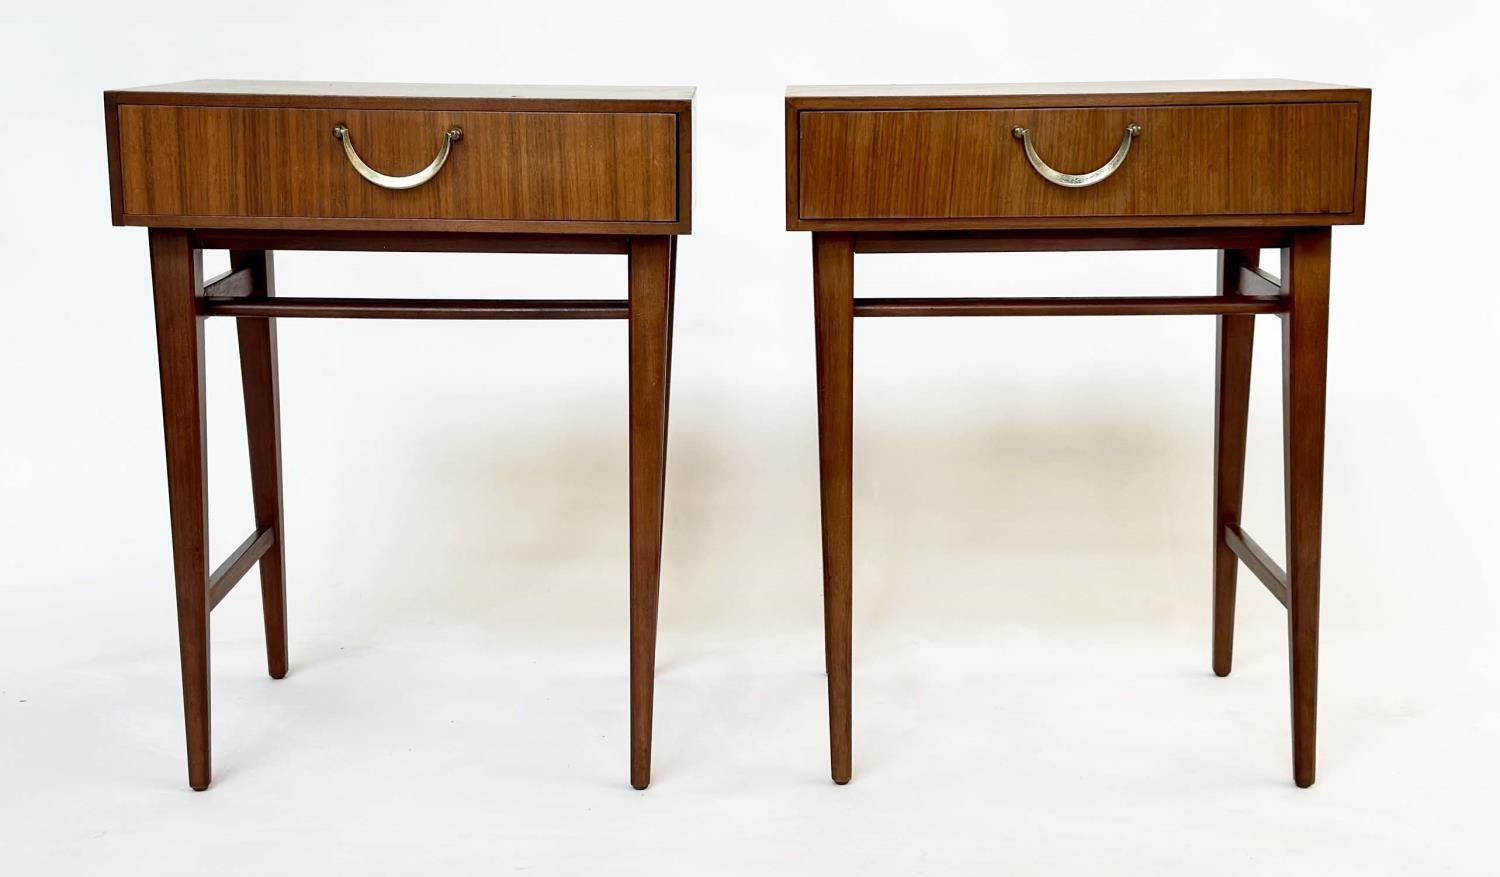 MEREDEW LAMP TABLES, a pair, 1970s Afromosia and teak, each with frieze drawer and stretchered - Image 2 of 9